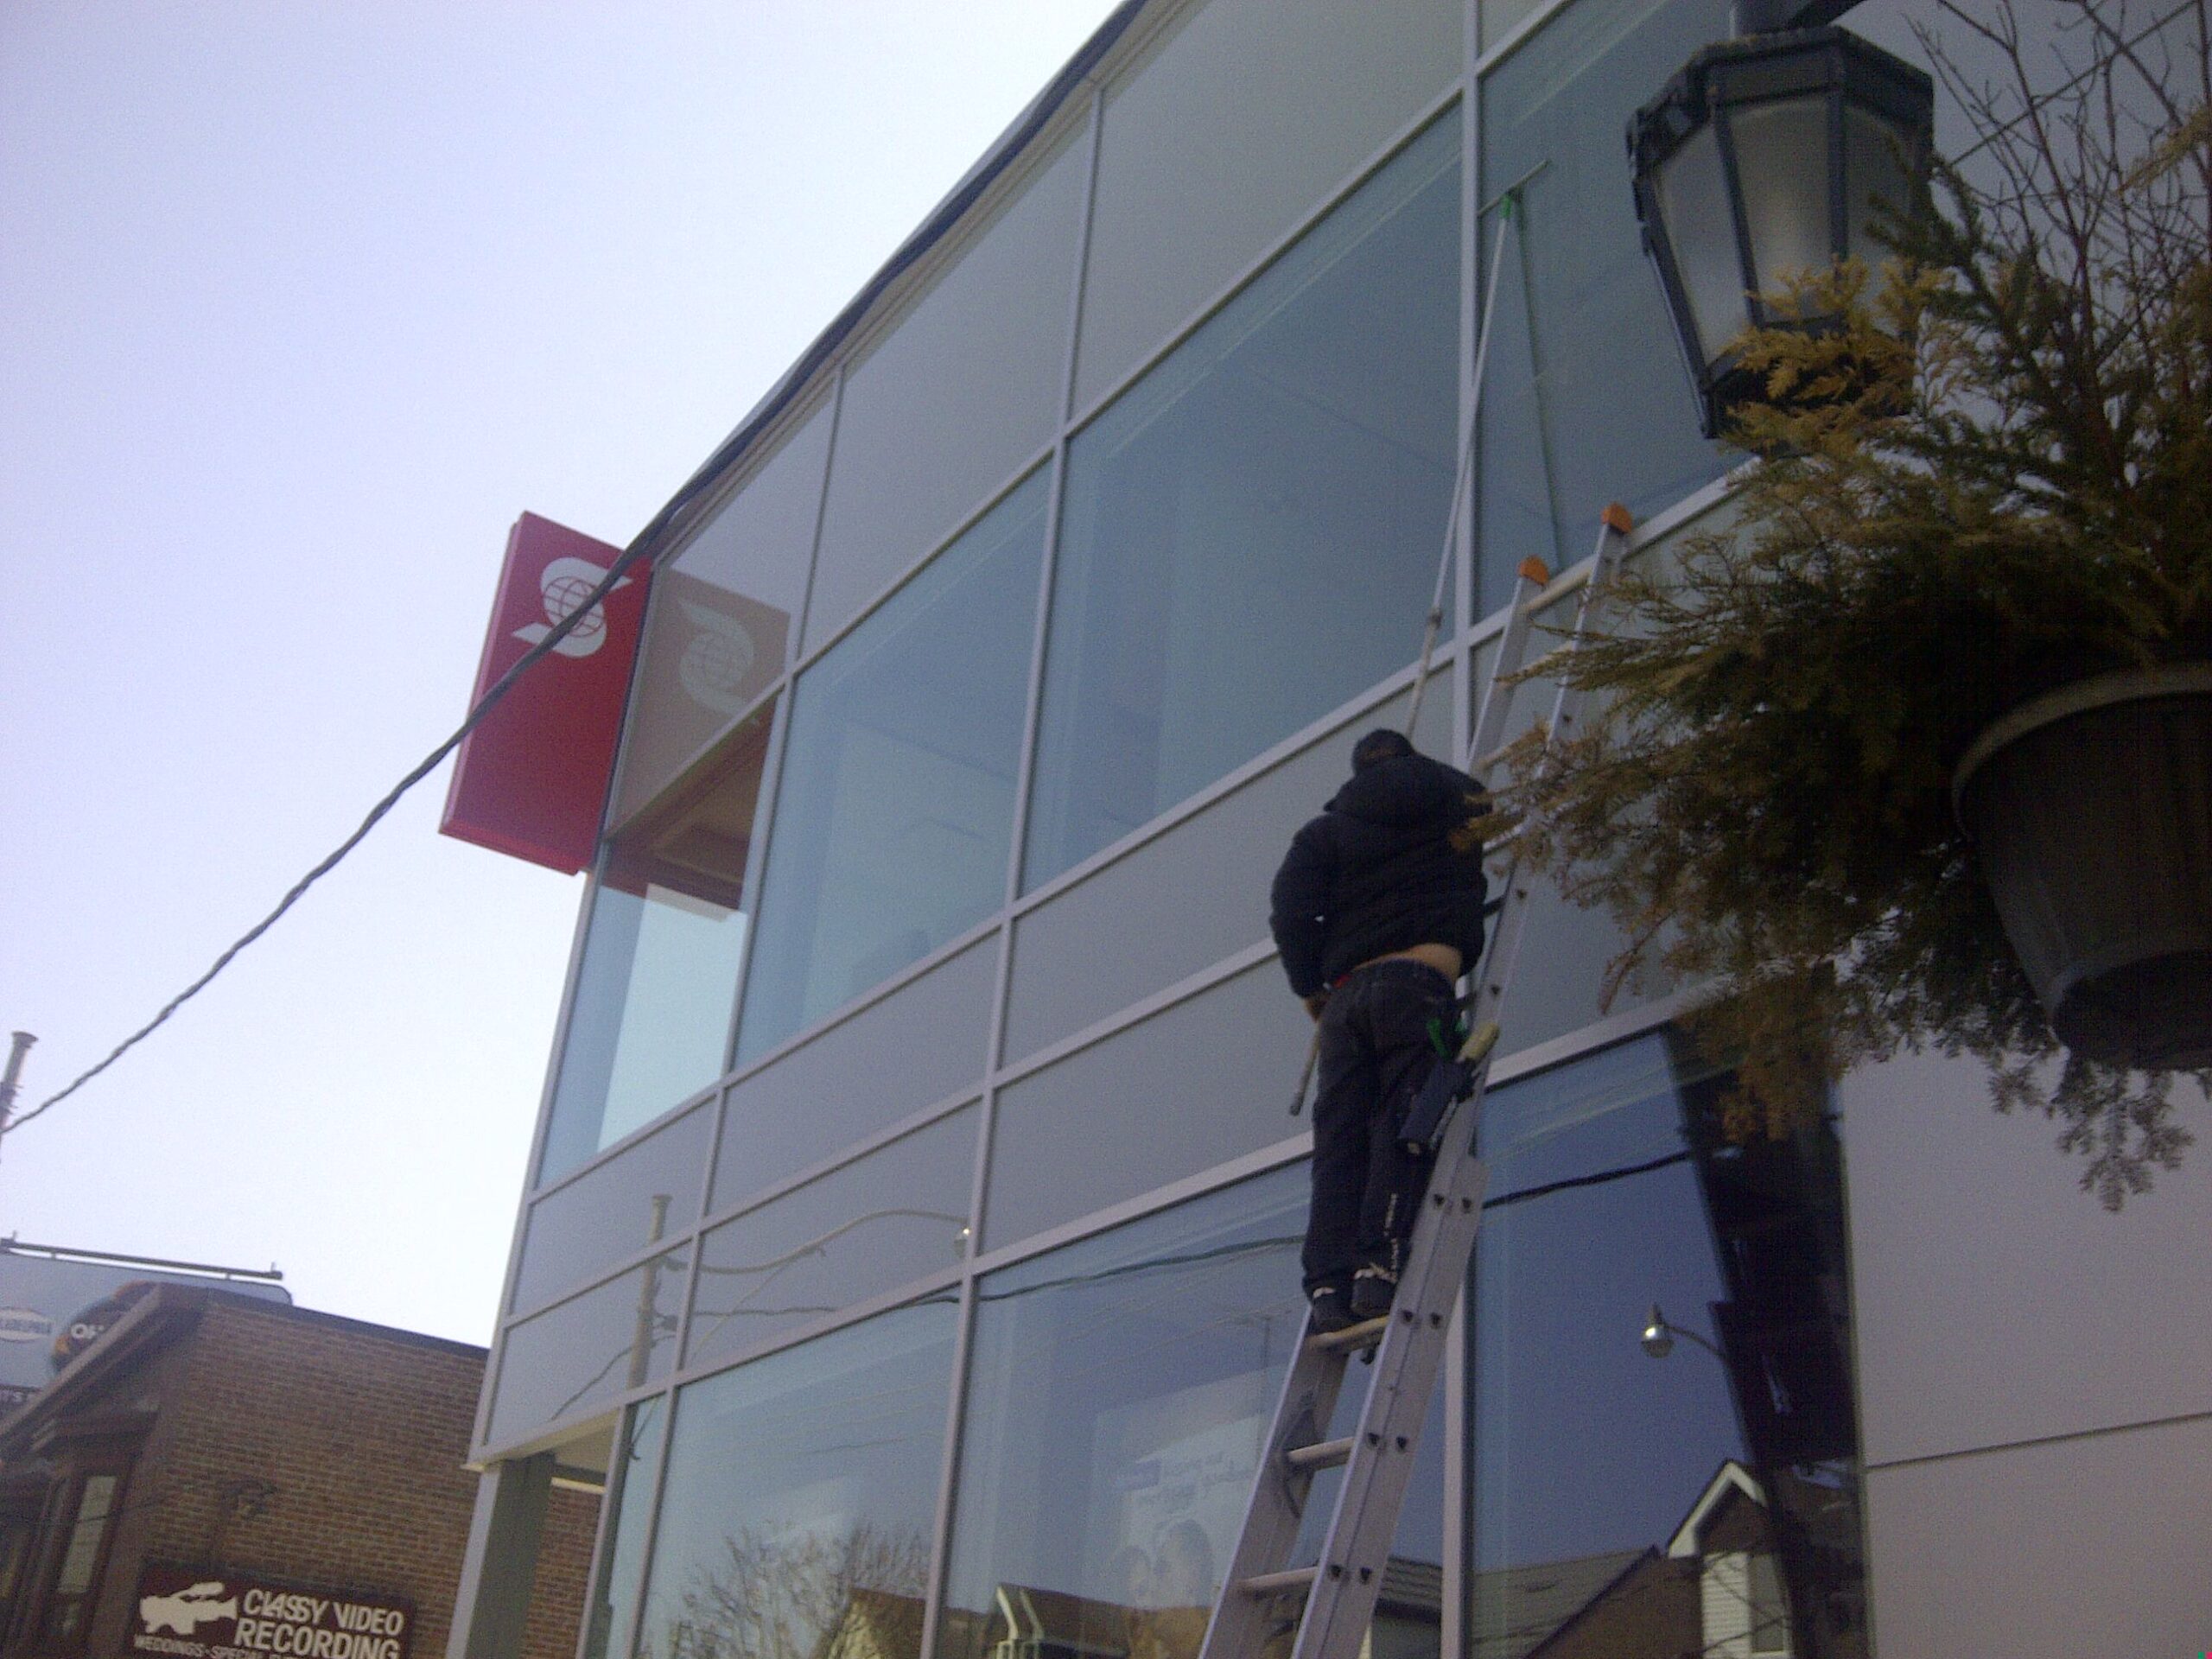 commercial window washing service